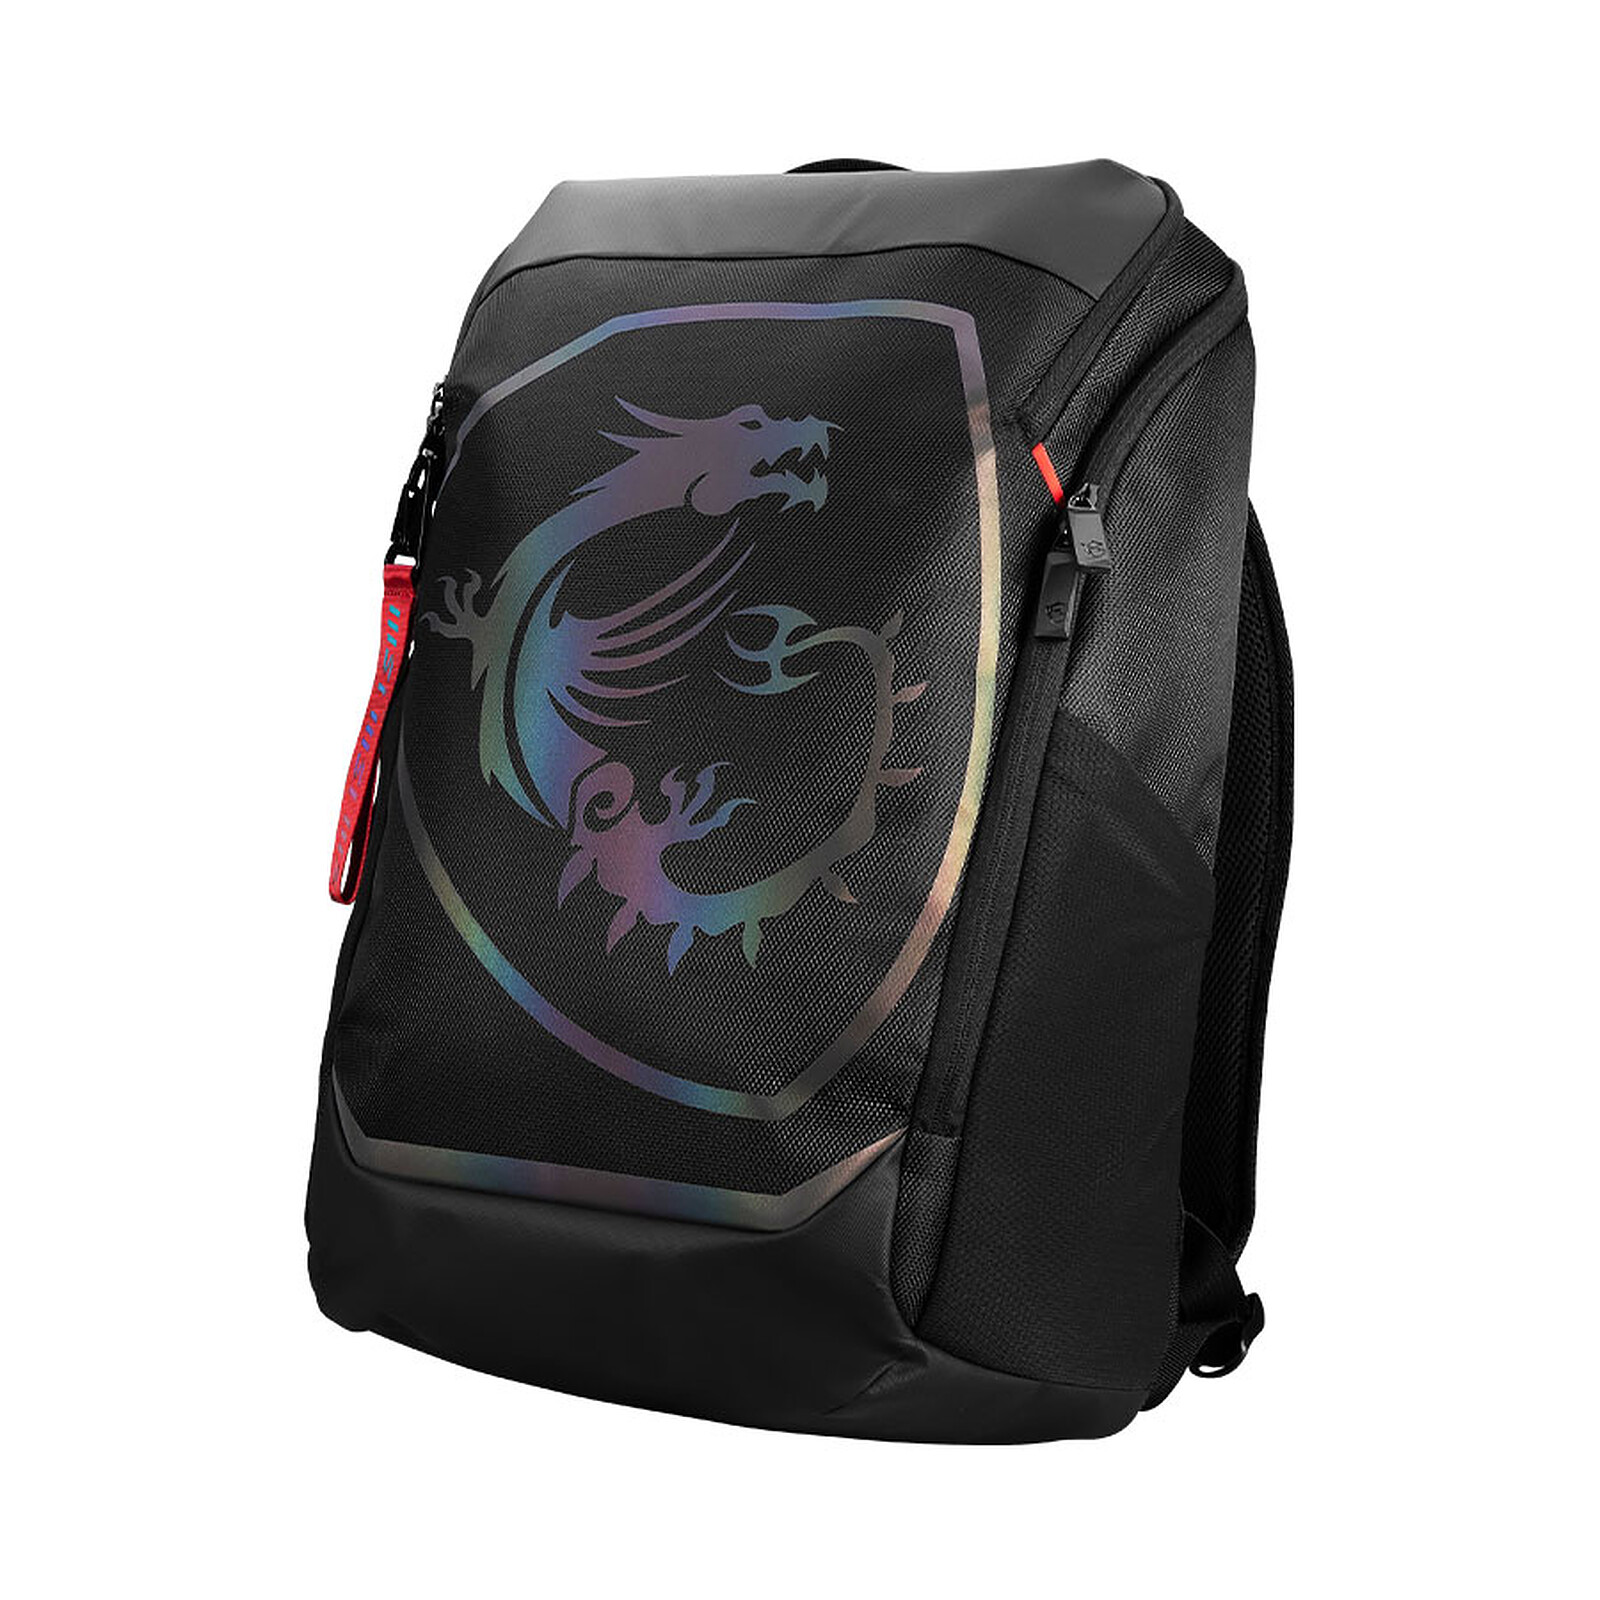 MSI True Gaming Backpack Bag For Laptop (15.6in - Dark Grey): Buy Online at  Best Price in Egypt - Souq is now Amazon.eg